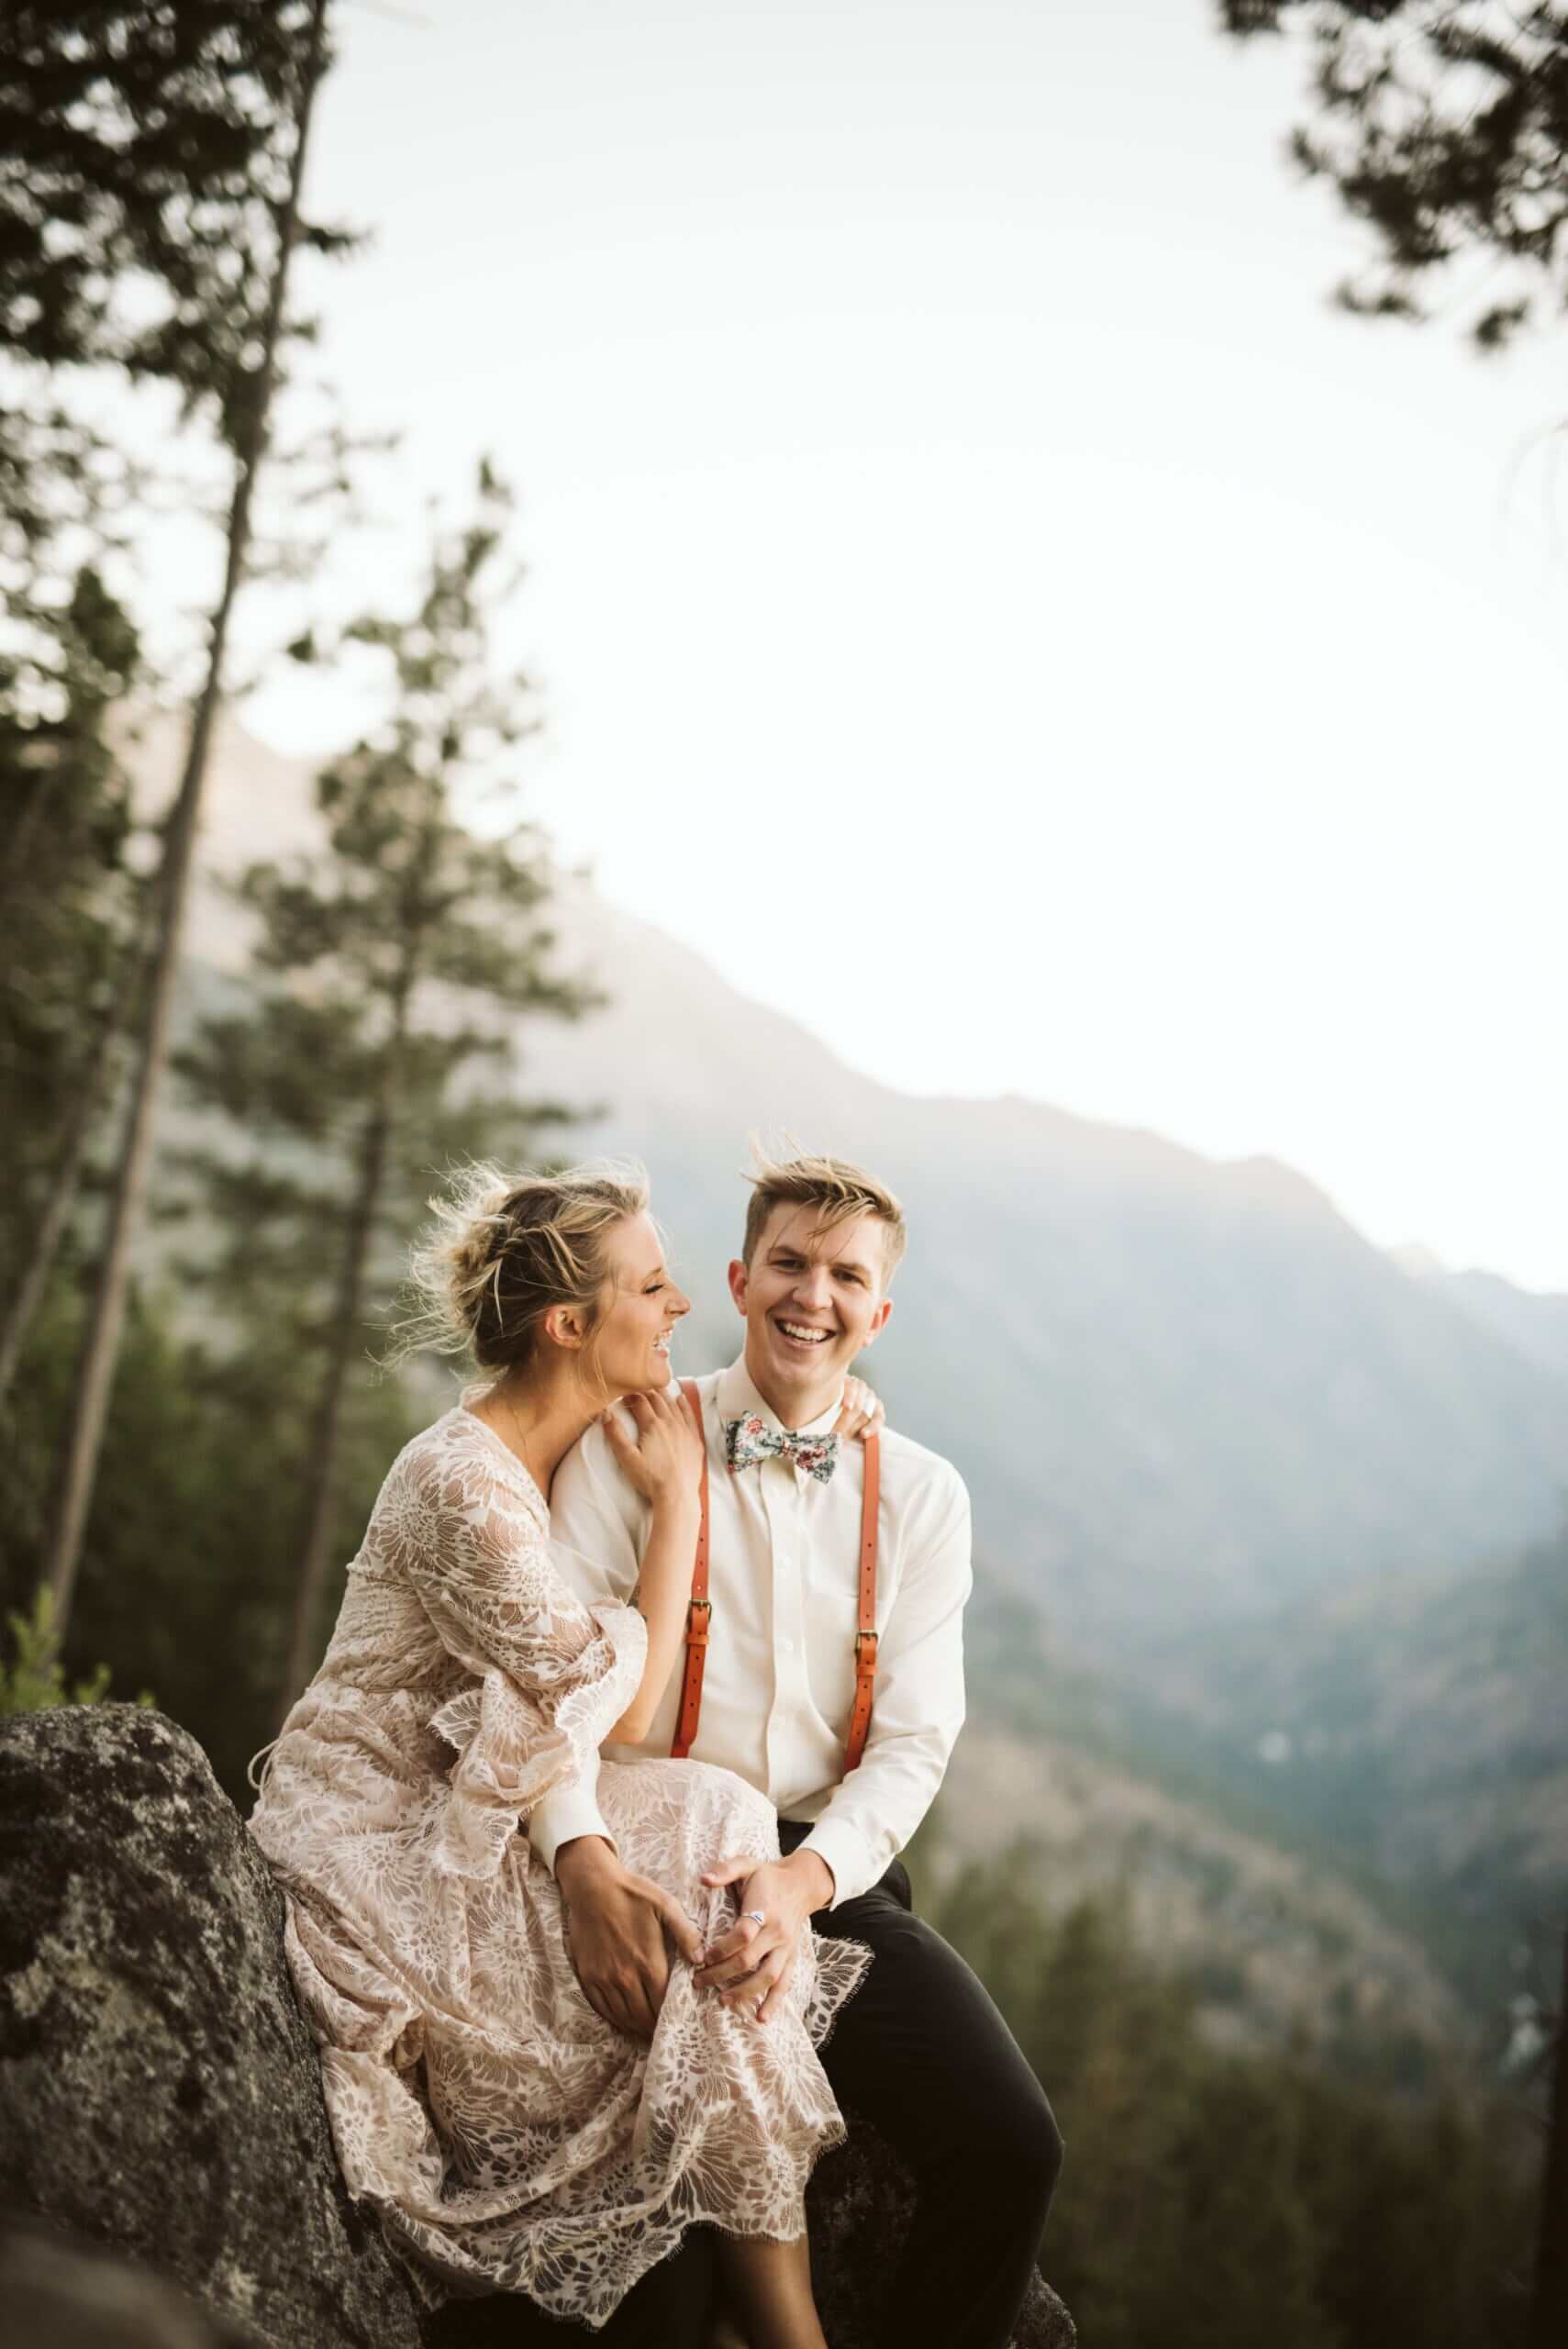 Leavenworth Elopement, 3 Reasons Why Elopements Are A Rad Alternative To Traditional Weddings